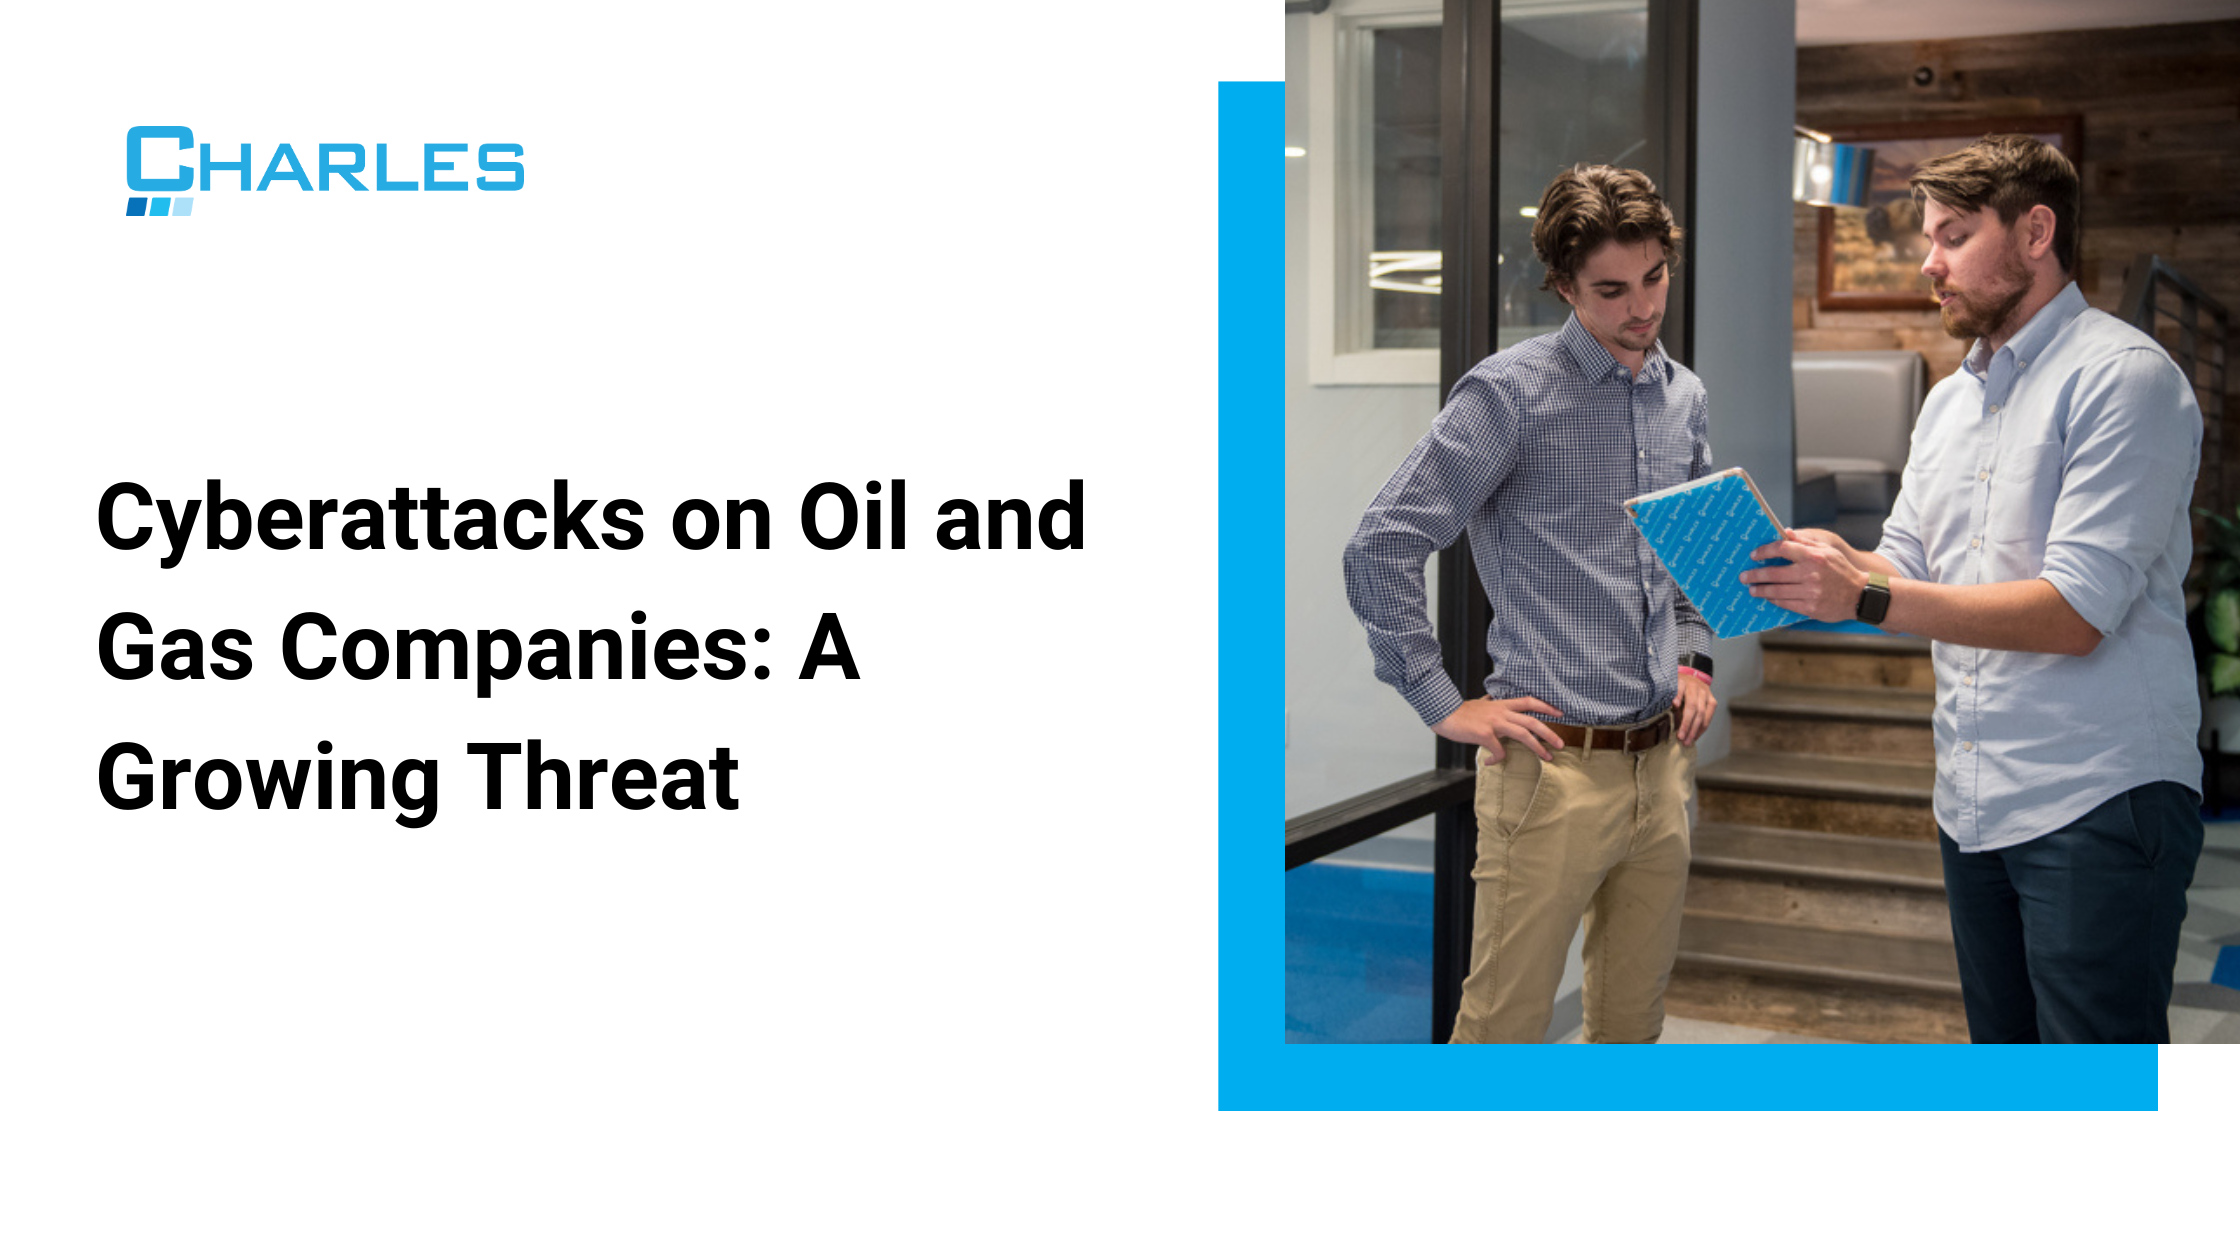 Cyberattacks on Oil and Gas Companies: A Growing Threat